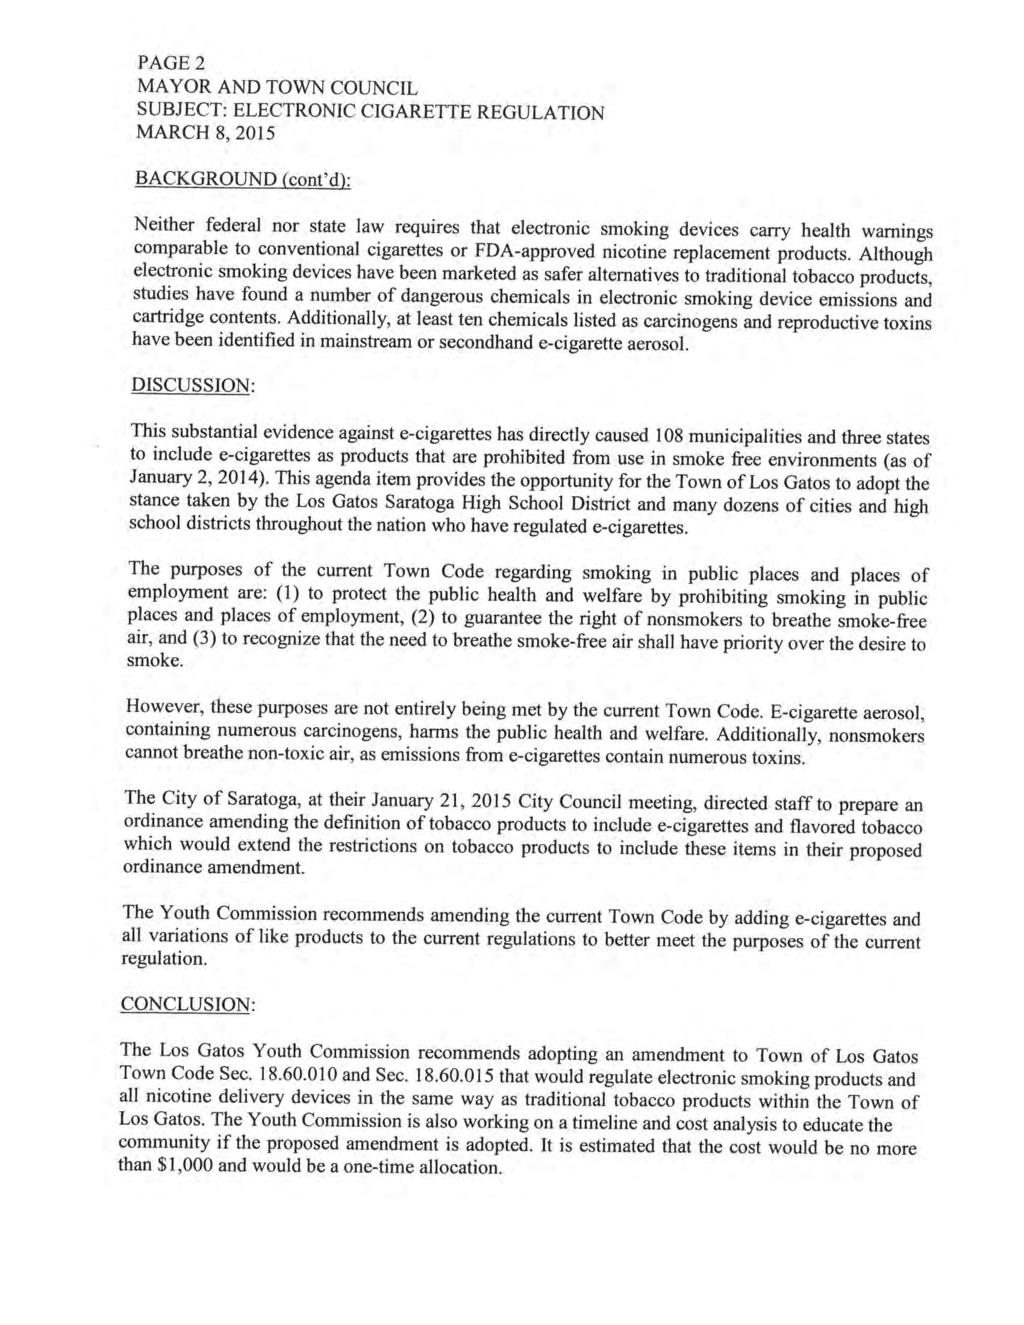 PAGE 2 MAYOR AND TOWN COUNCIL SUBJECT: ELECTRONIC CIGARETTE REGULATION MARCH 8, 2015 BACKGROUND (cont' d): Neither federal nor state law requires that electronic smoking devices carry health warnings